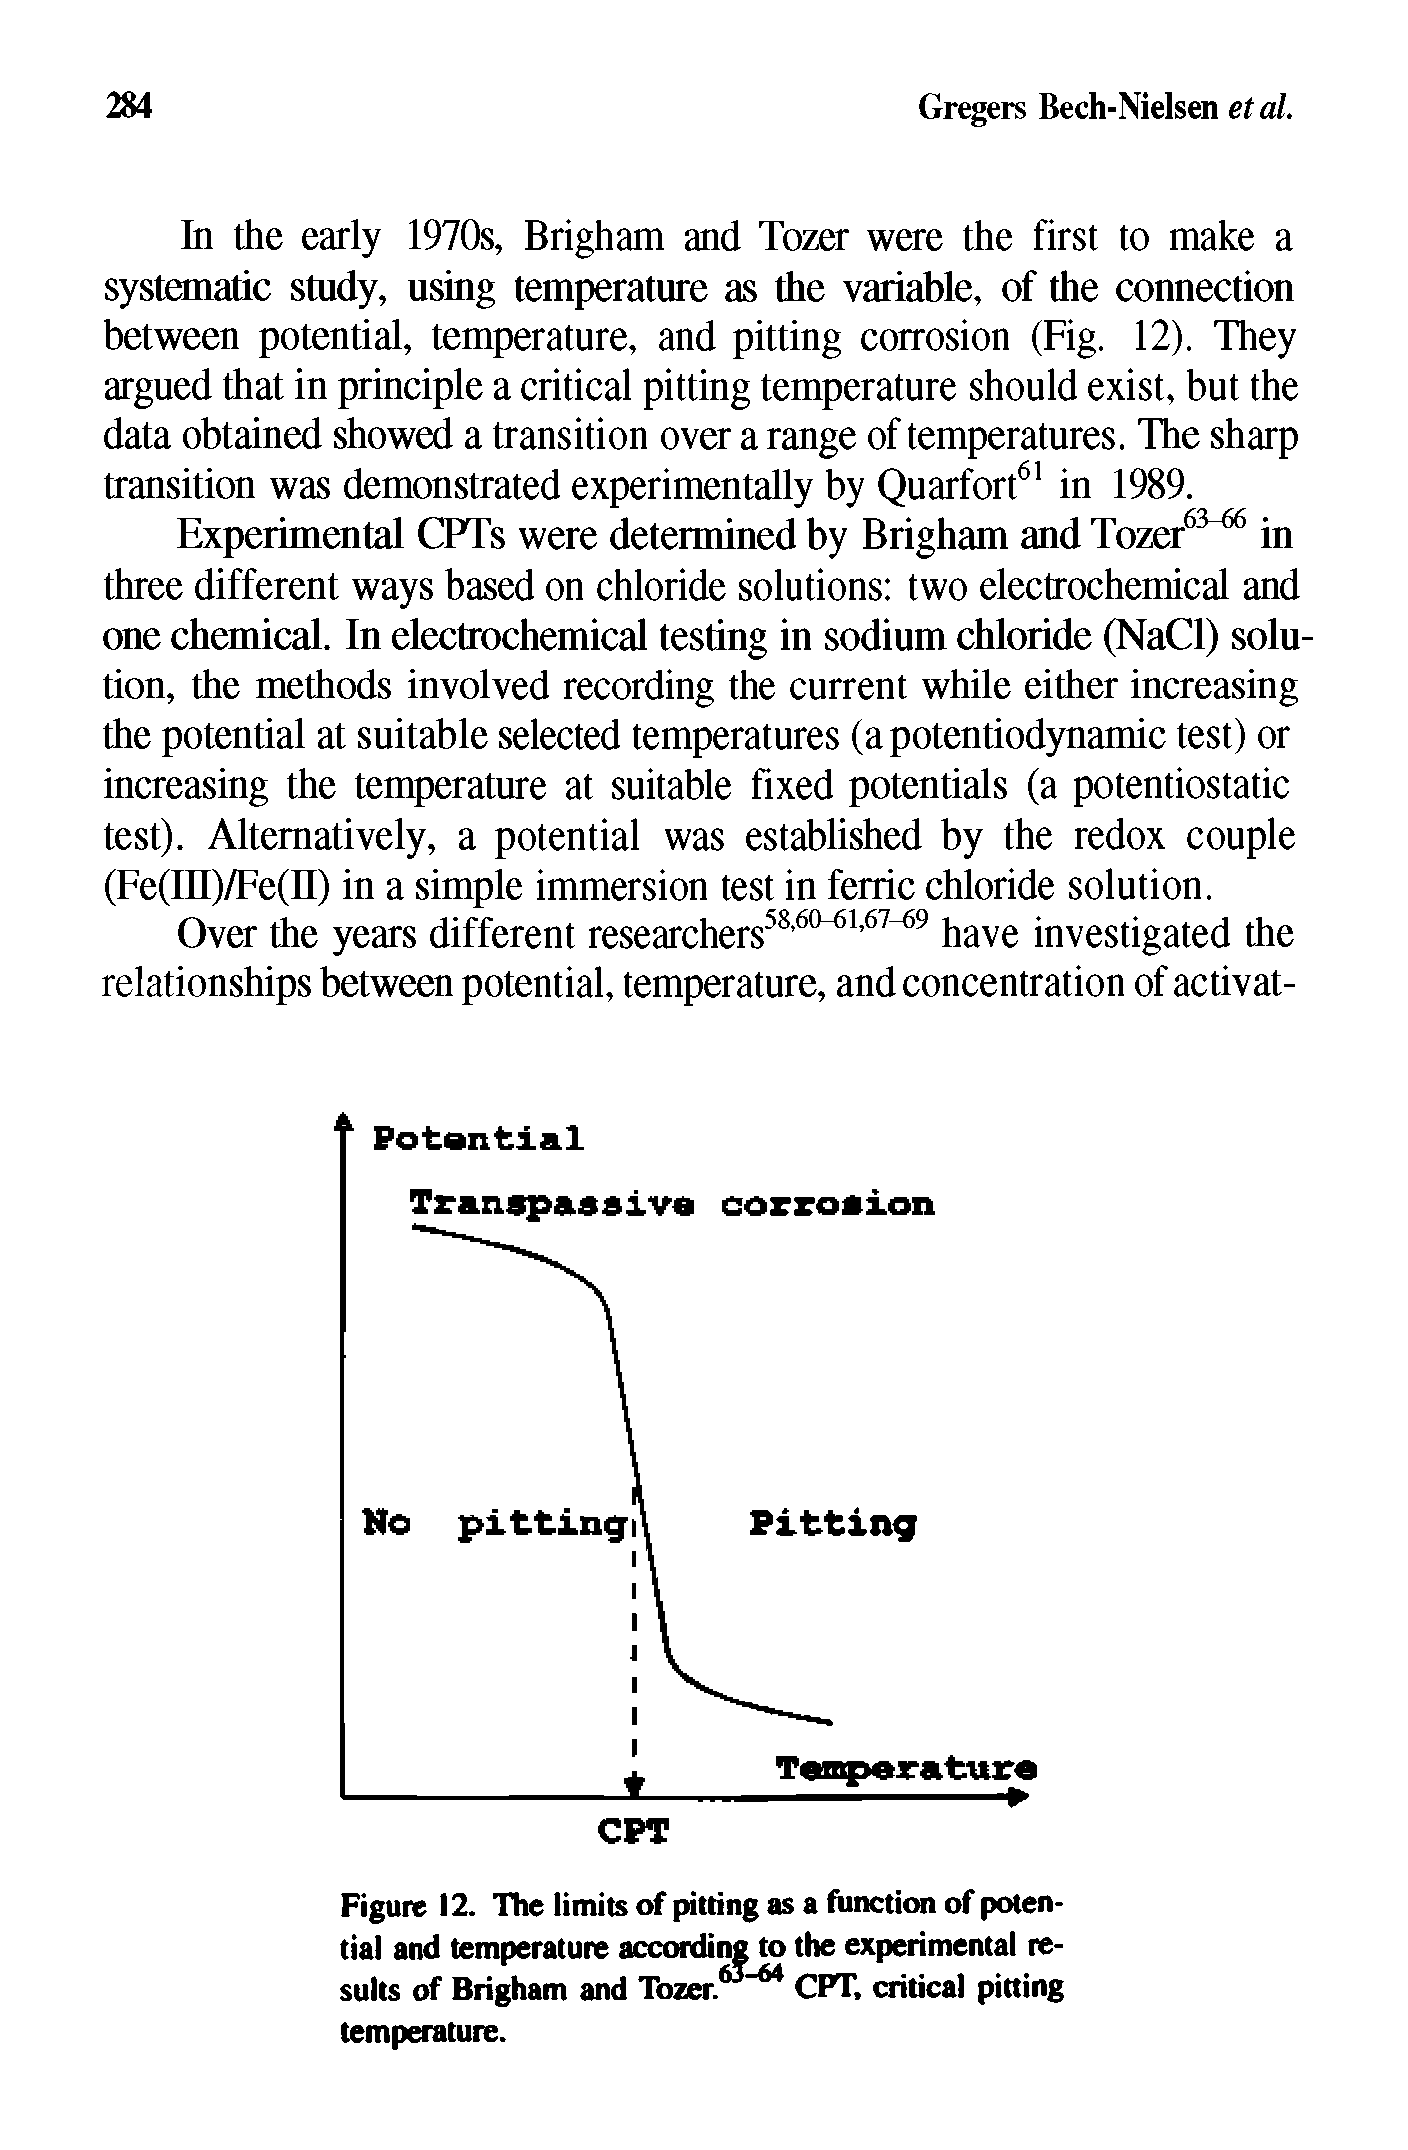 Figure 12. The limits of pitting as a function of potential and temperature according to the experimental results of Brigham and Tozer. CPT, critical pitting temperature.